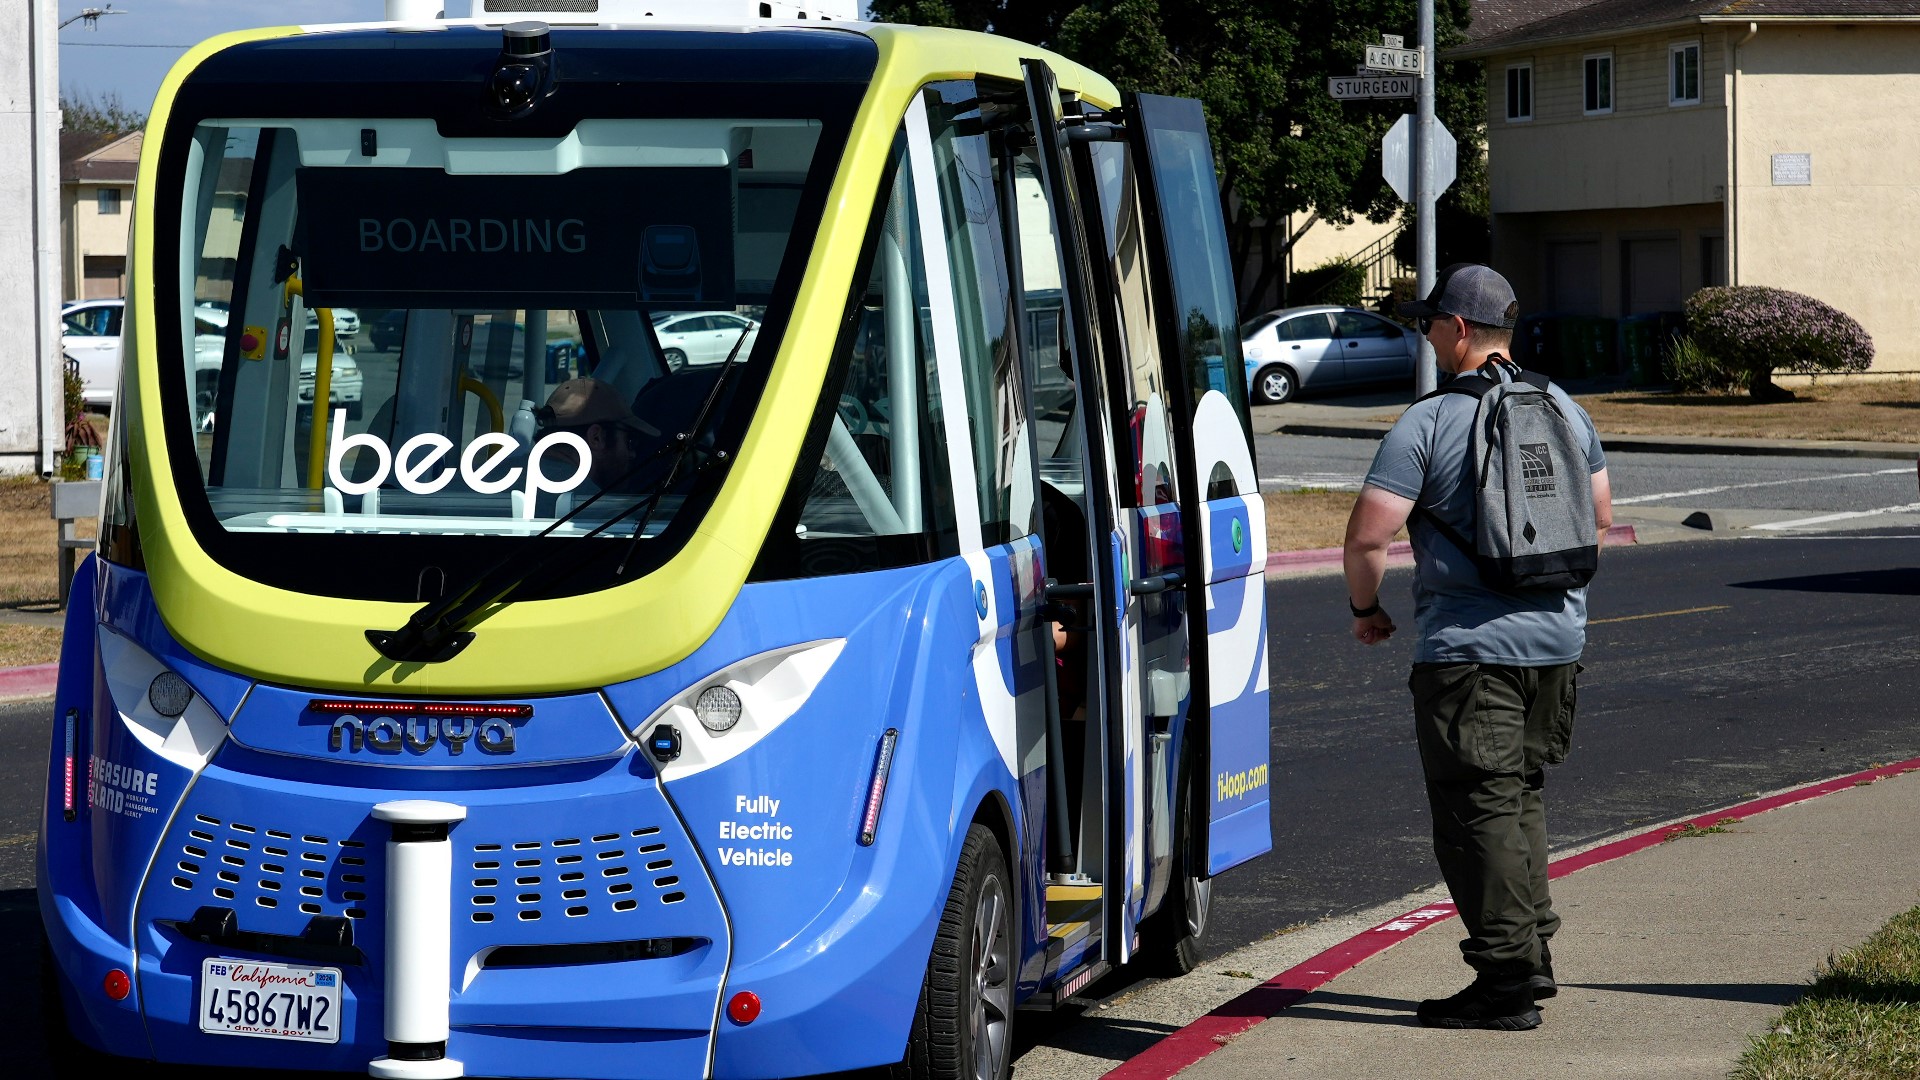 San Francisco launched the autonomous bus pilot project a week after California regulators approved the expansion of driverless taxi service.